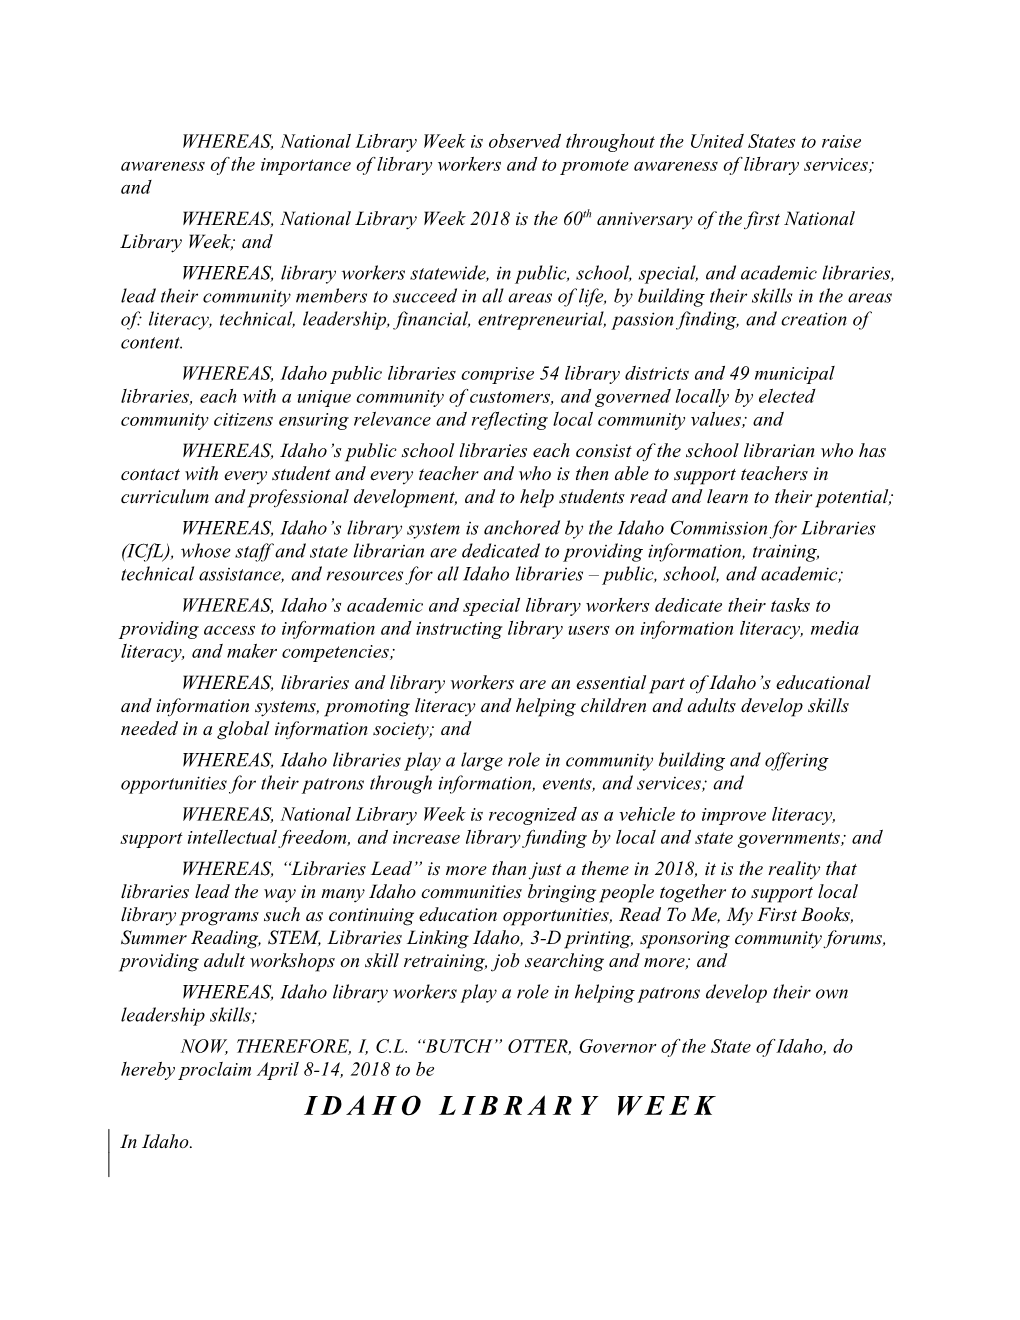 WHEREAS, National Library Week 2018 Is the 60Thanniversary of the First National Library